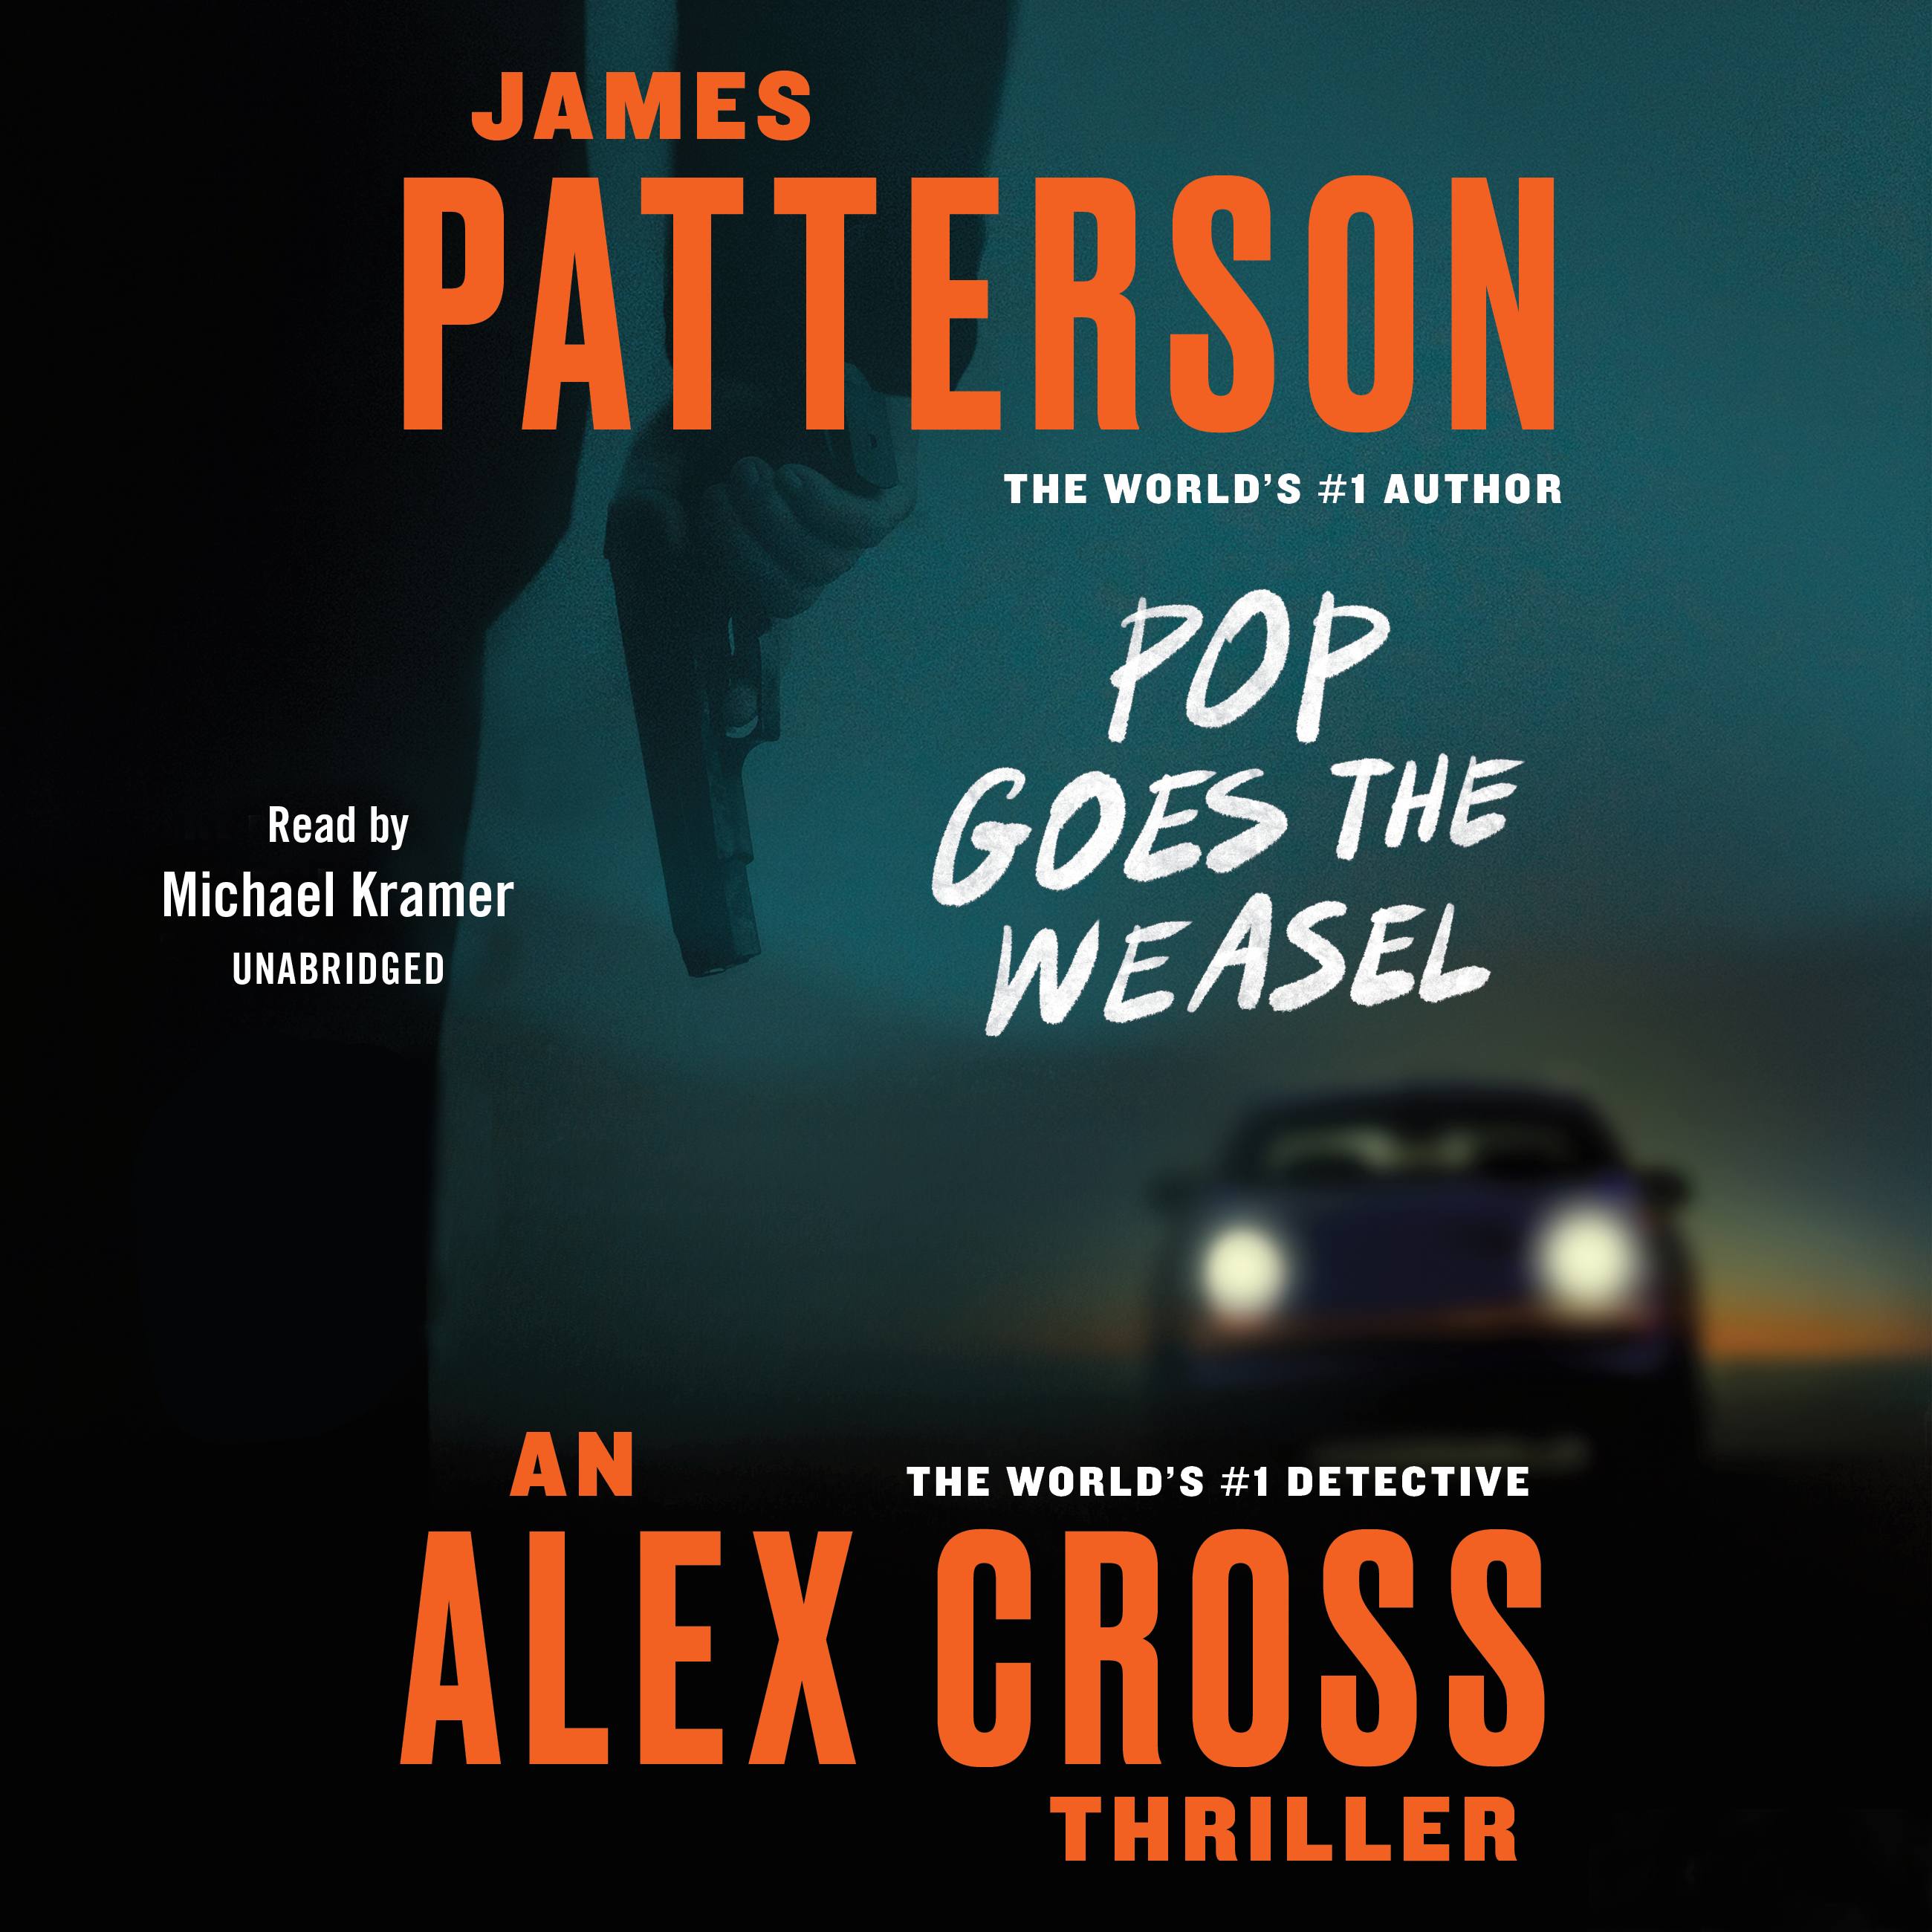 Pop Goes the Weasel by James Patterson Hachette Book Group pic